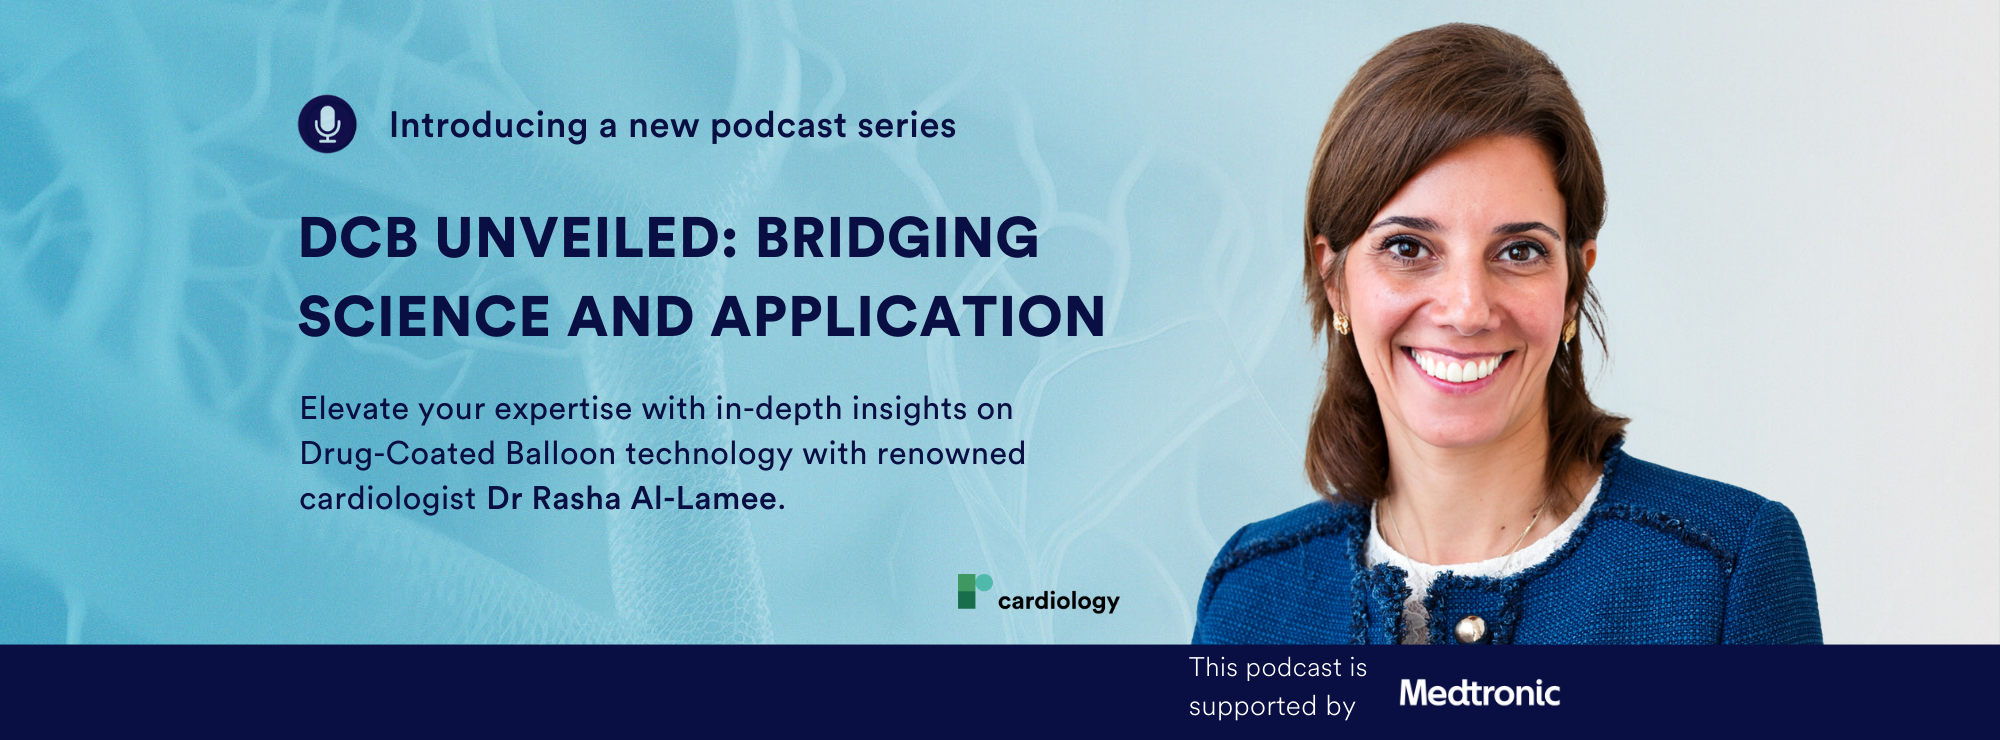 DCB Unveiled: Bridging Science and Application